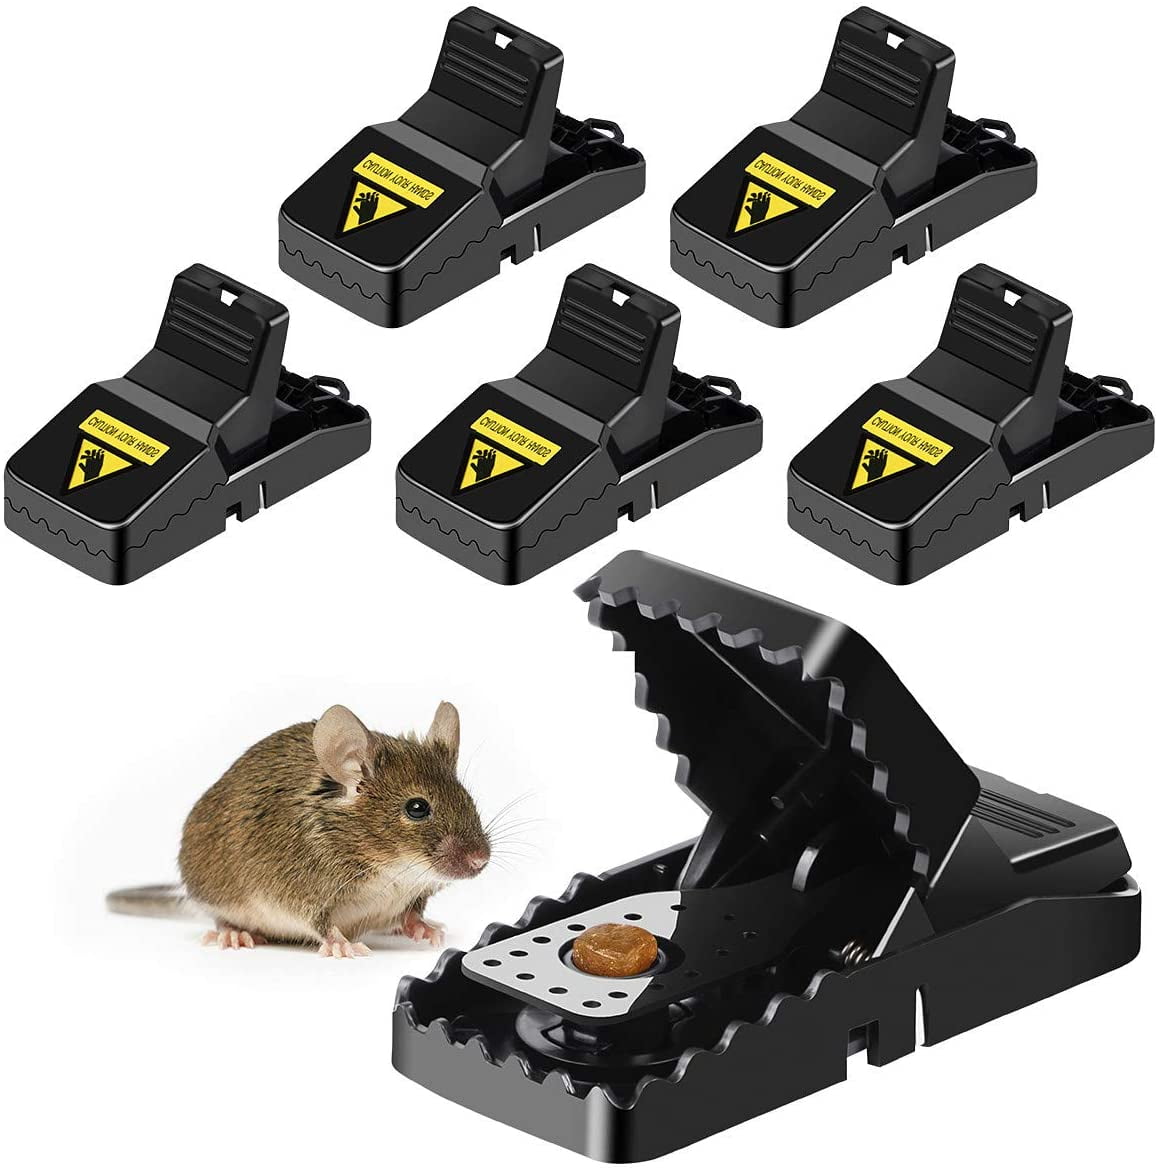 2/6Pack Mouse Trap Rat Mice Rodent Killer Snap Trap Reusable Mouse Catcher Tools 